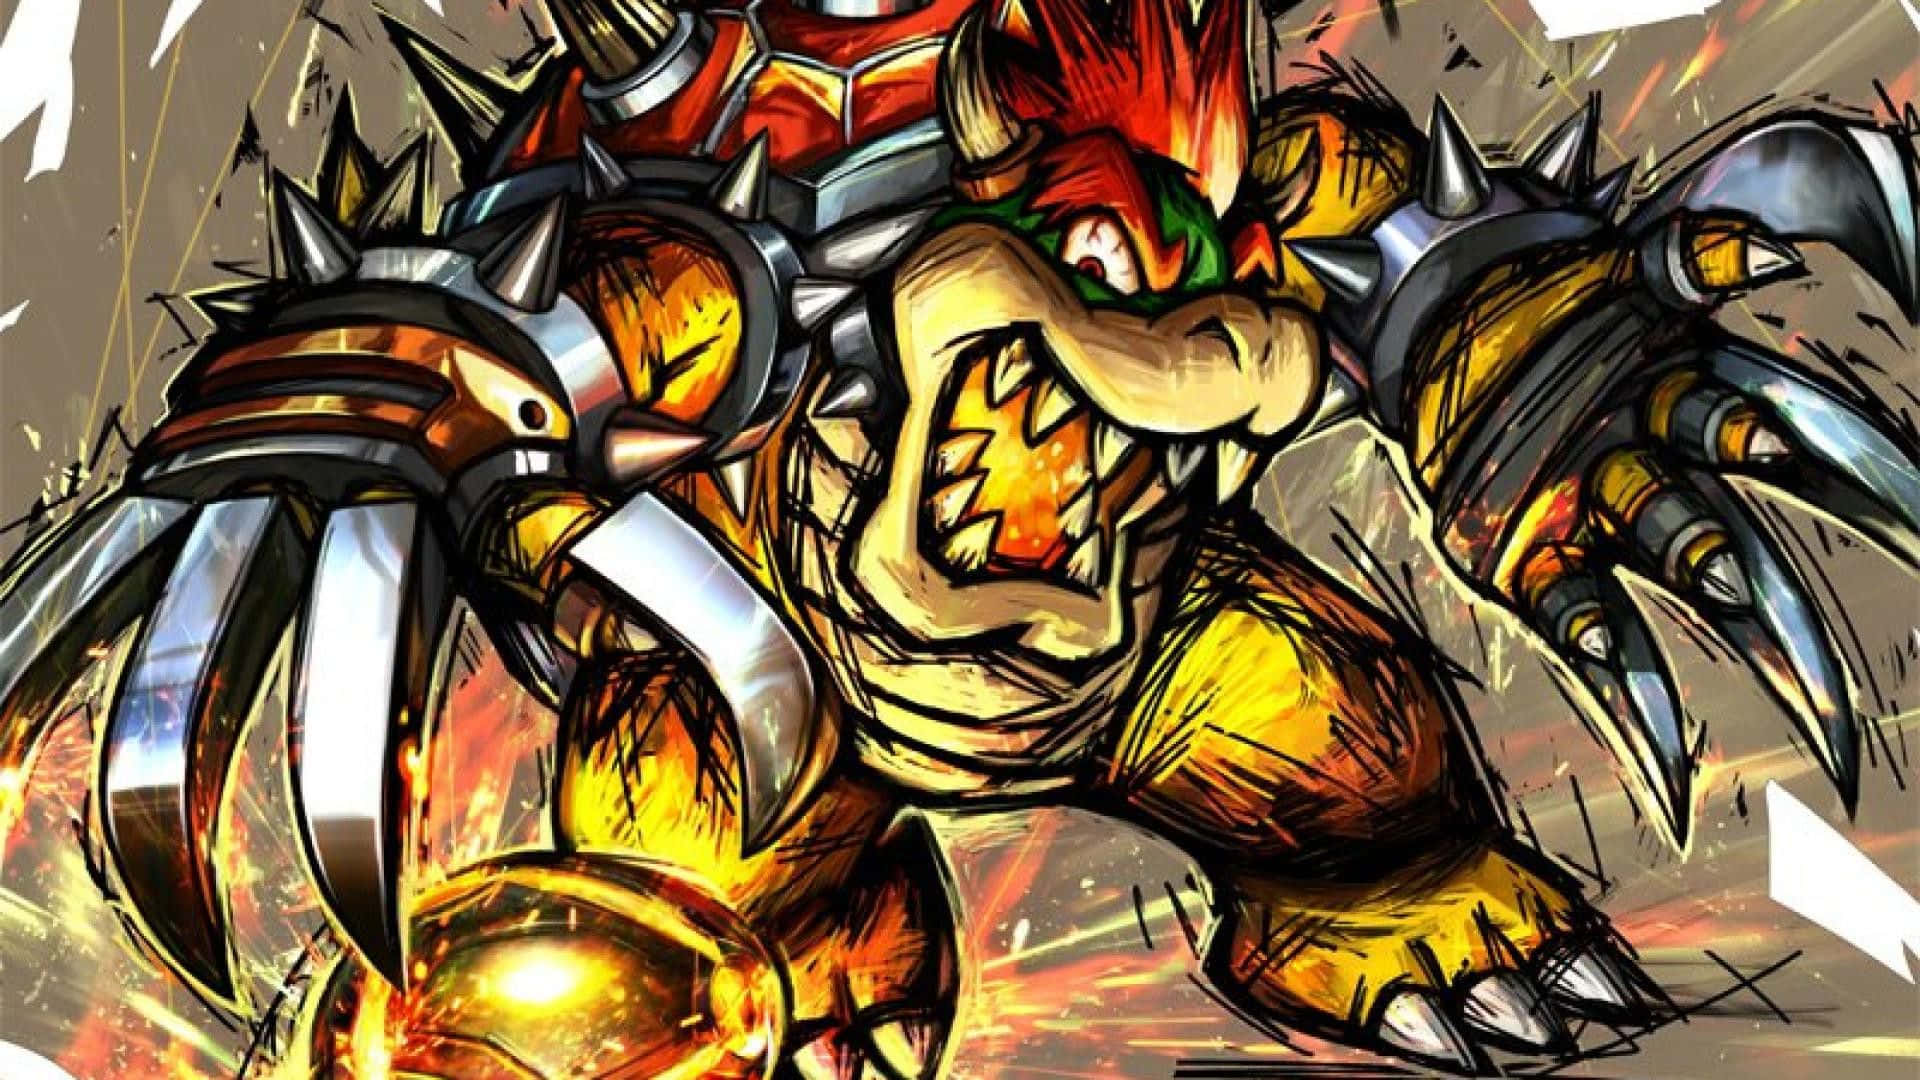 Download Bowser, the iconic video game villain, dominating the frame in fierce pose. Wallpaper